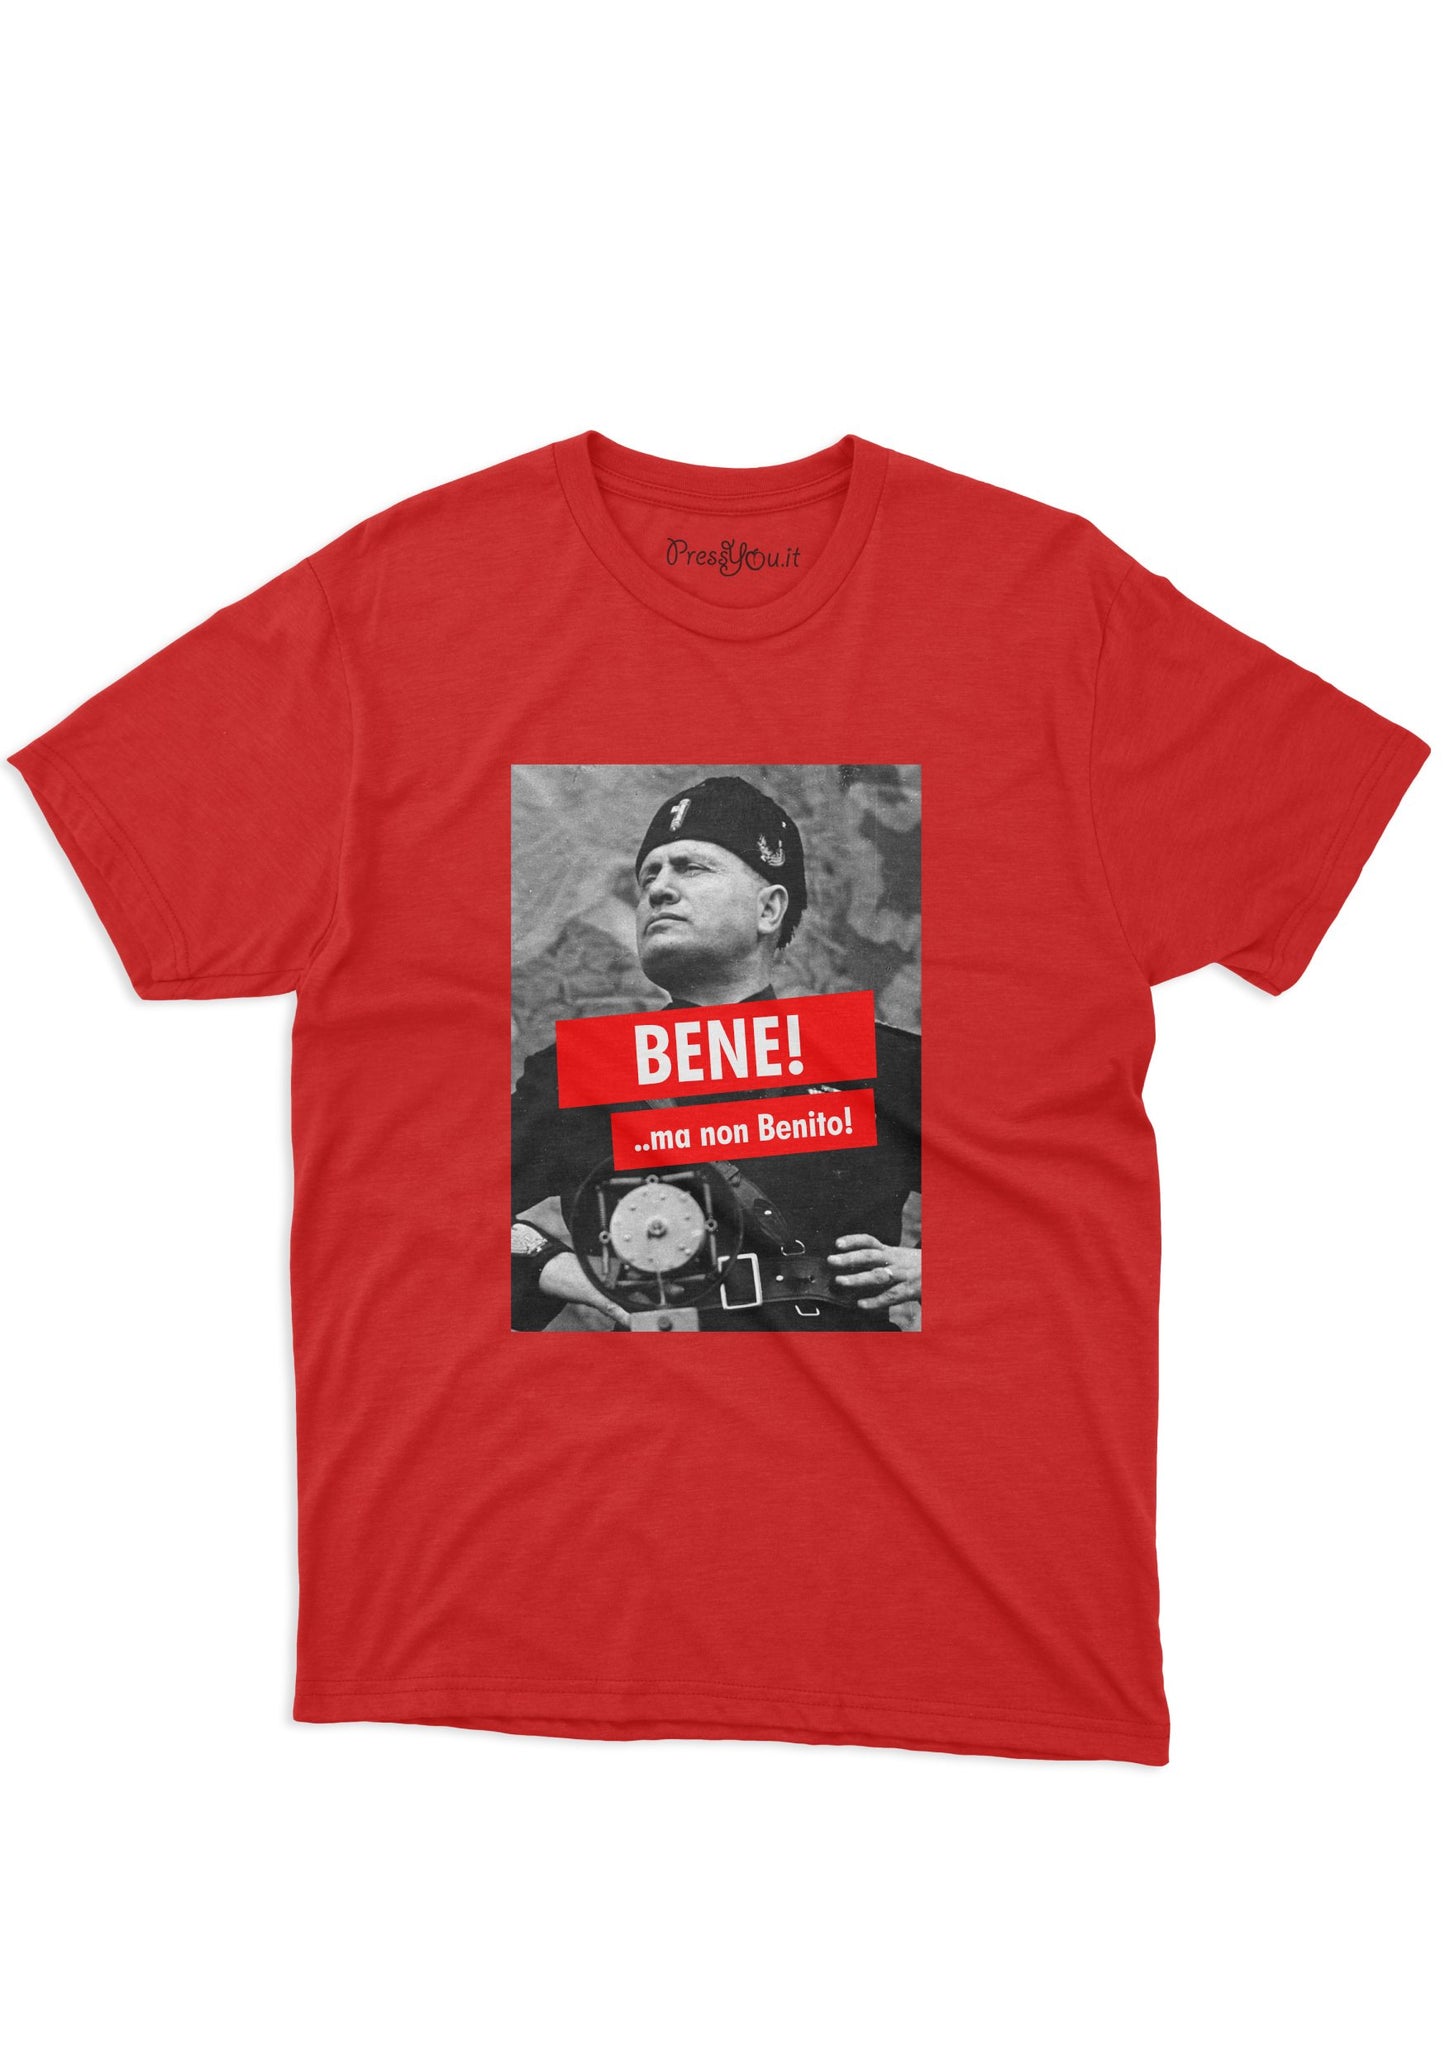 t-shirt t-shirt- fine but not benito mussolini funny gift idea